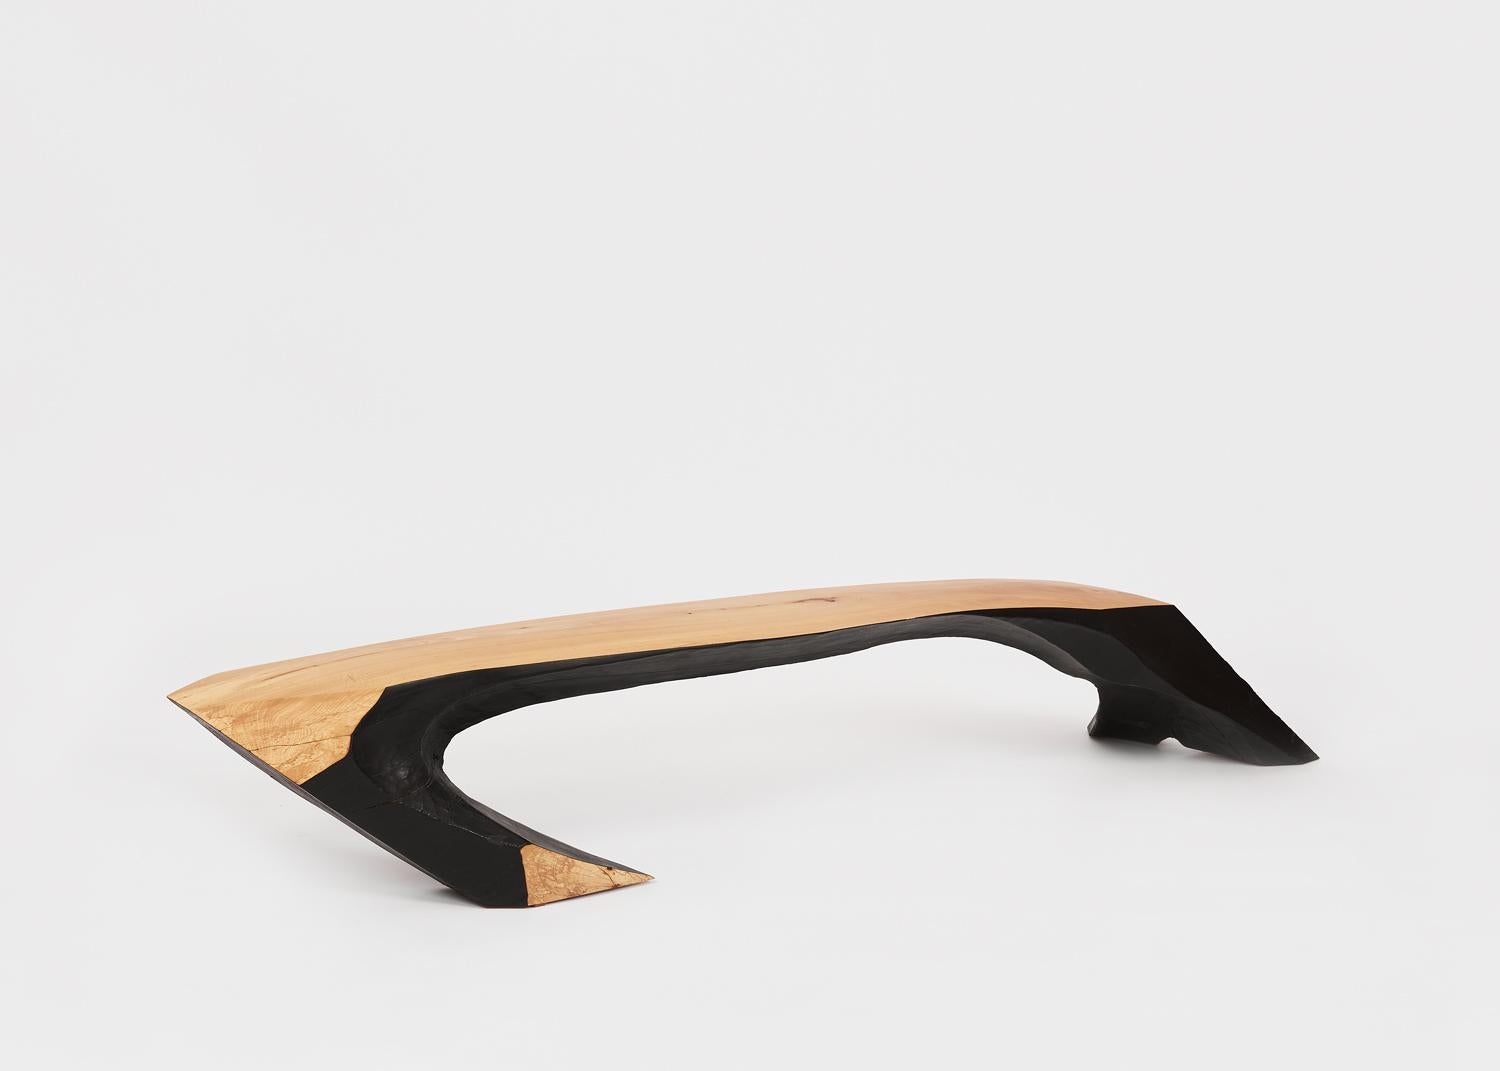 Die Baumbank by KASPAR HAMACHER, a sculptural bench made from a solid piece of wood from naturally fallen trees.

Handmade in Belgium, Die Baumbank is made to order as per your specifications.

KASPAR HAMACHER is a designer born and based in the